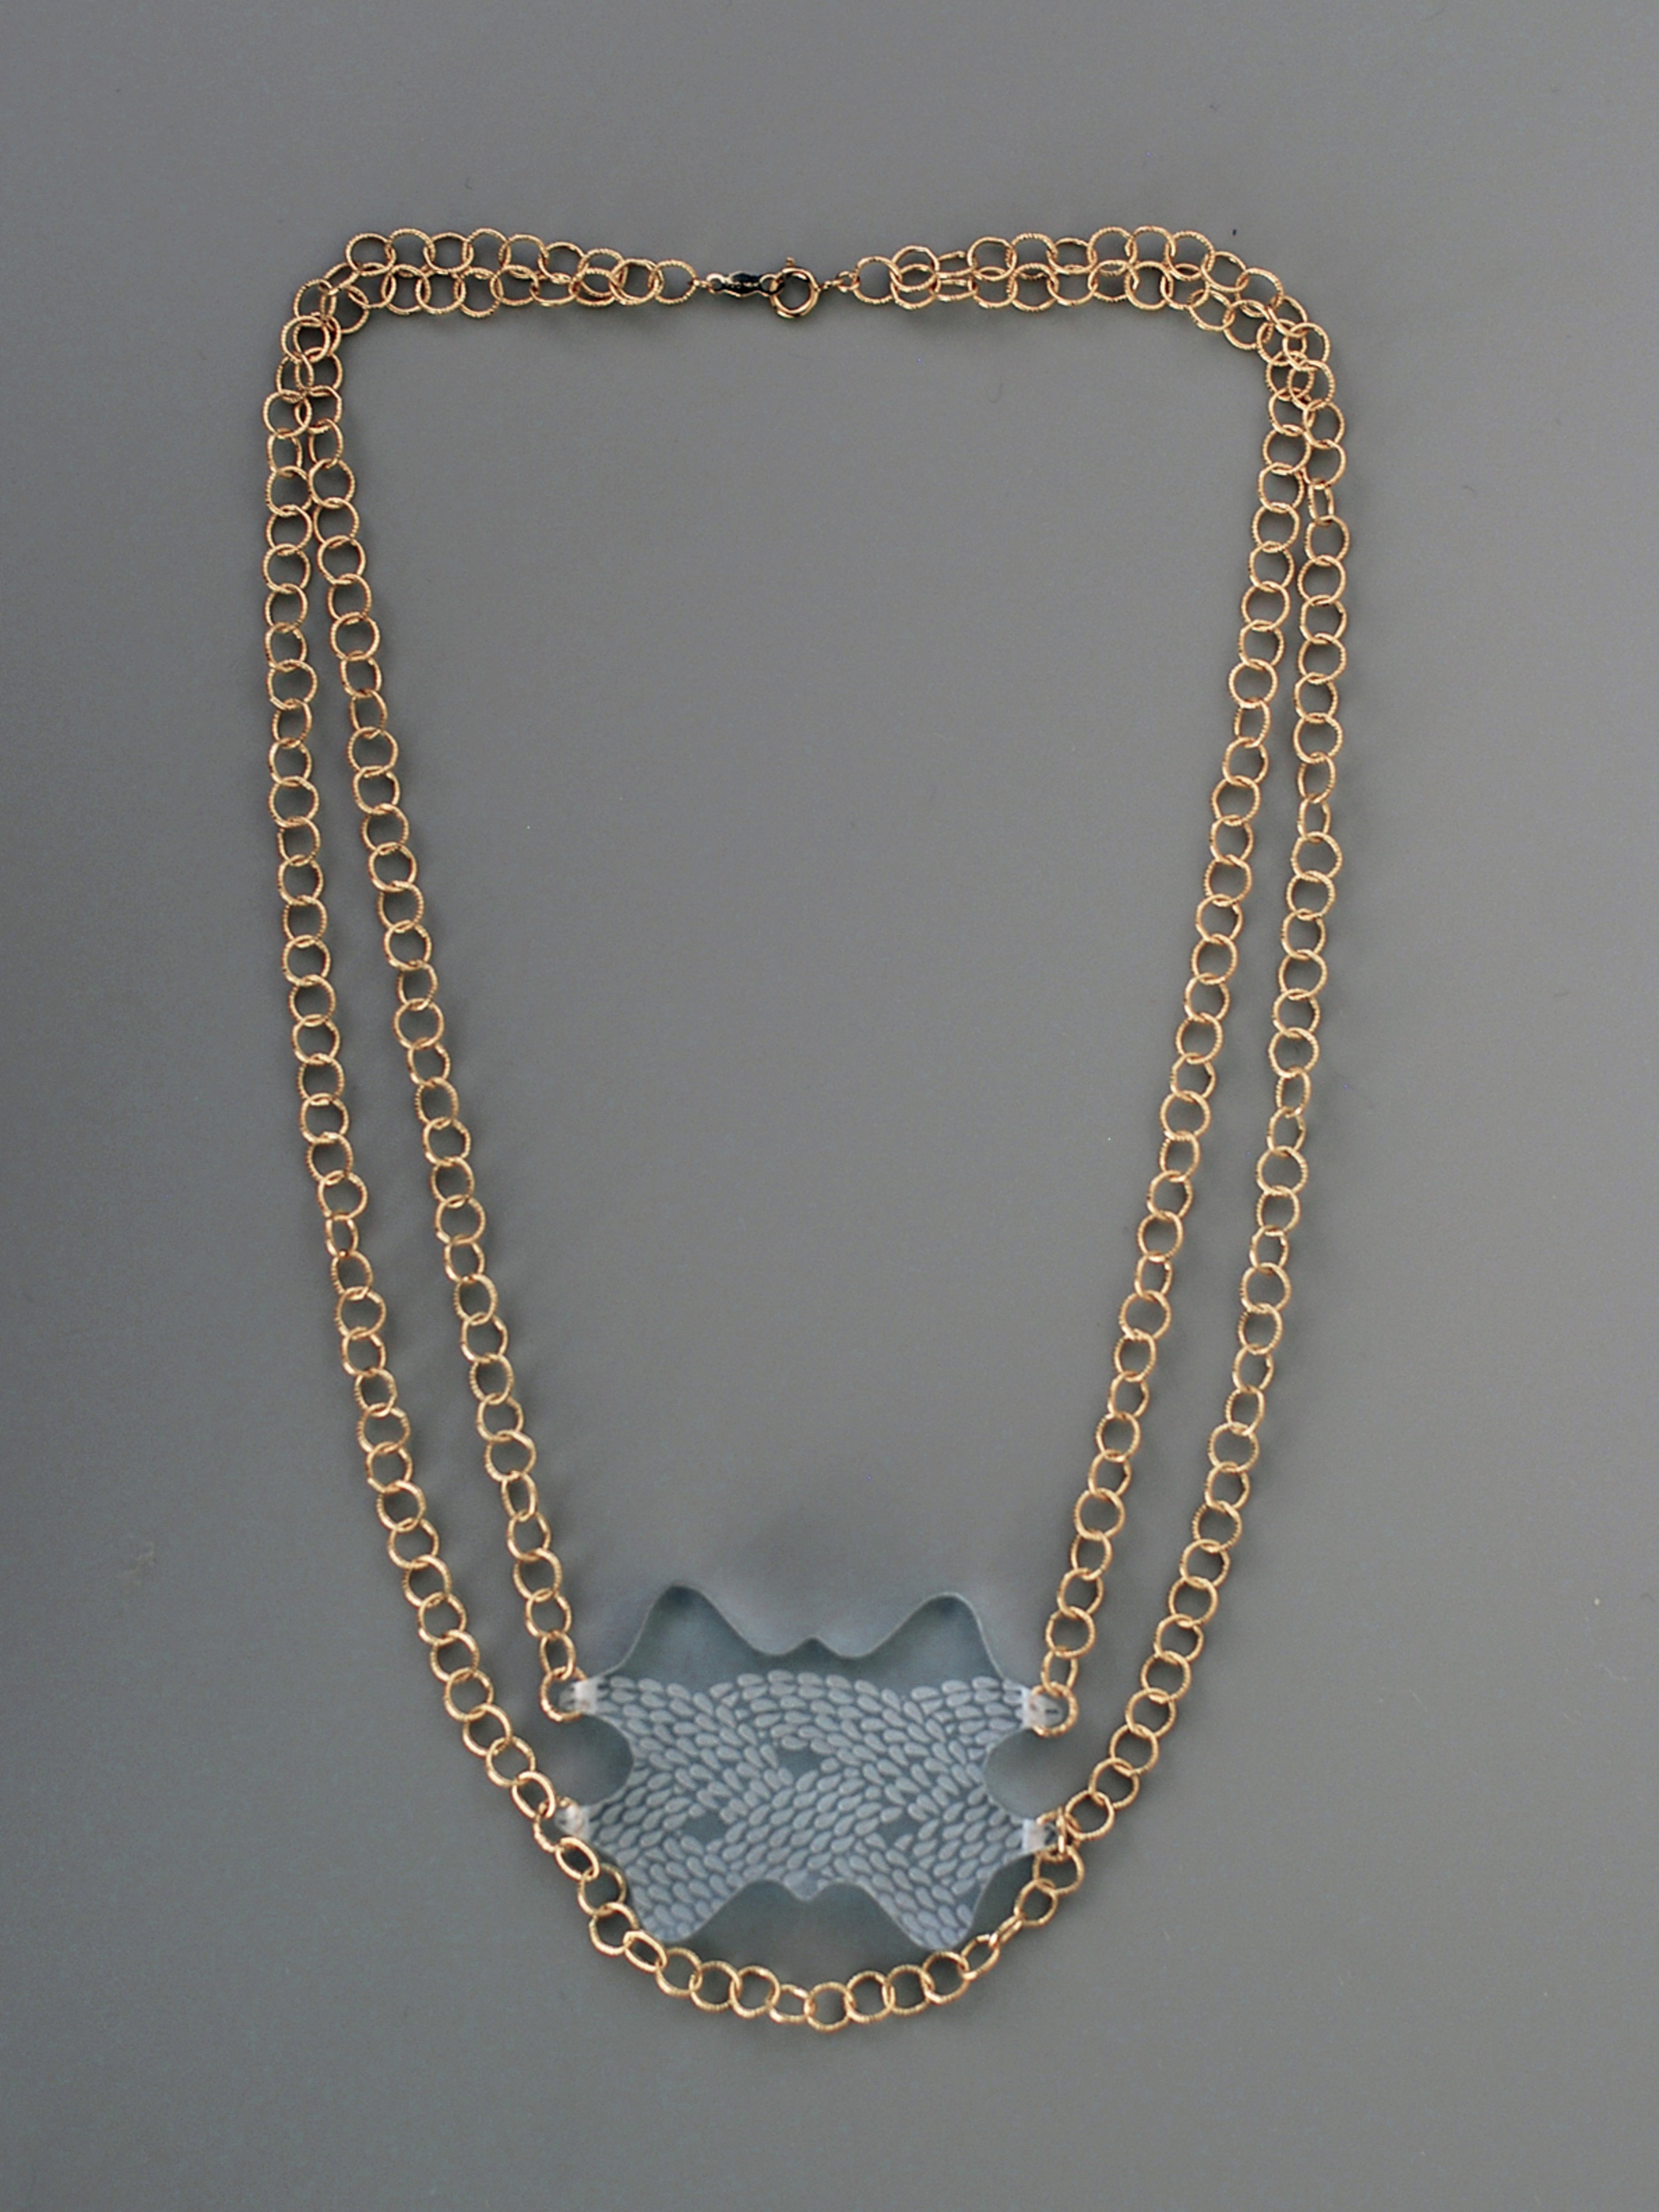 Knitting Chain Necklace